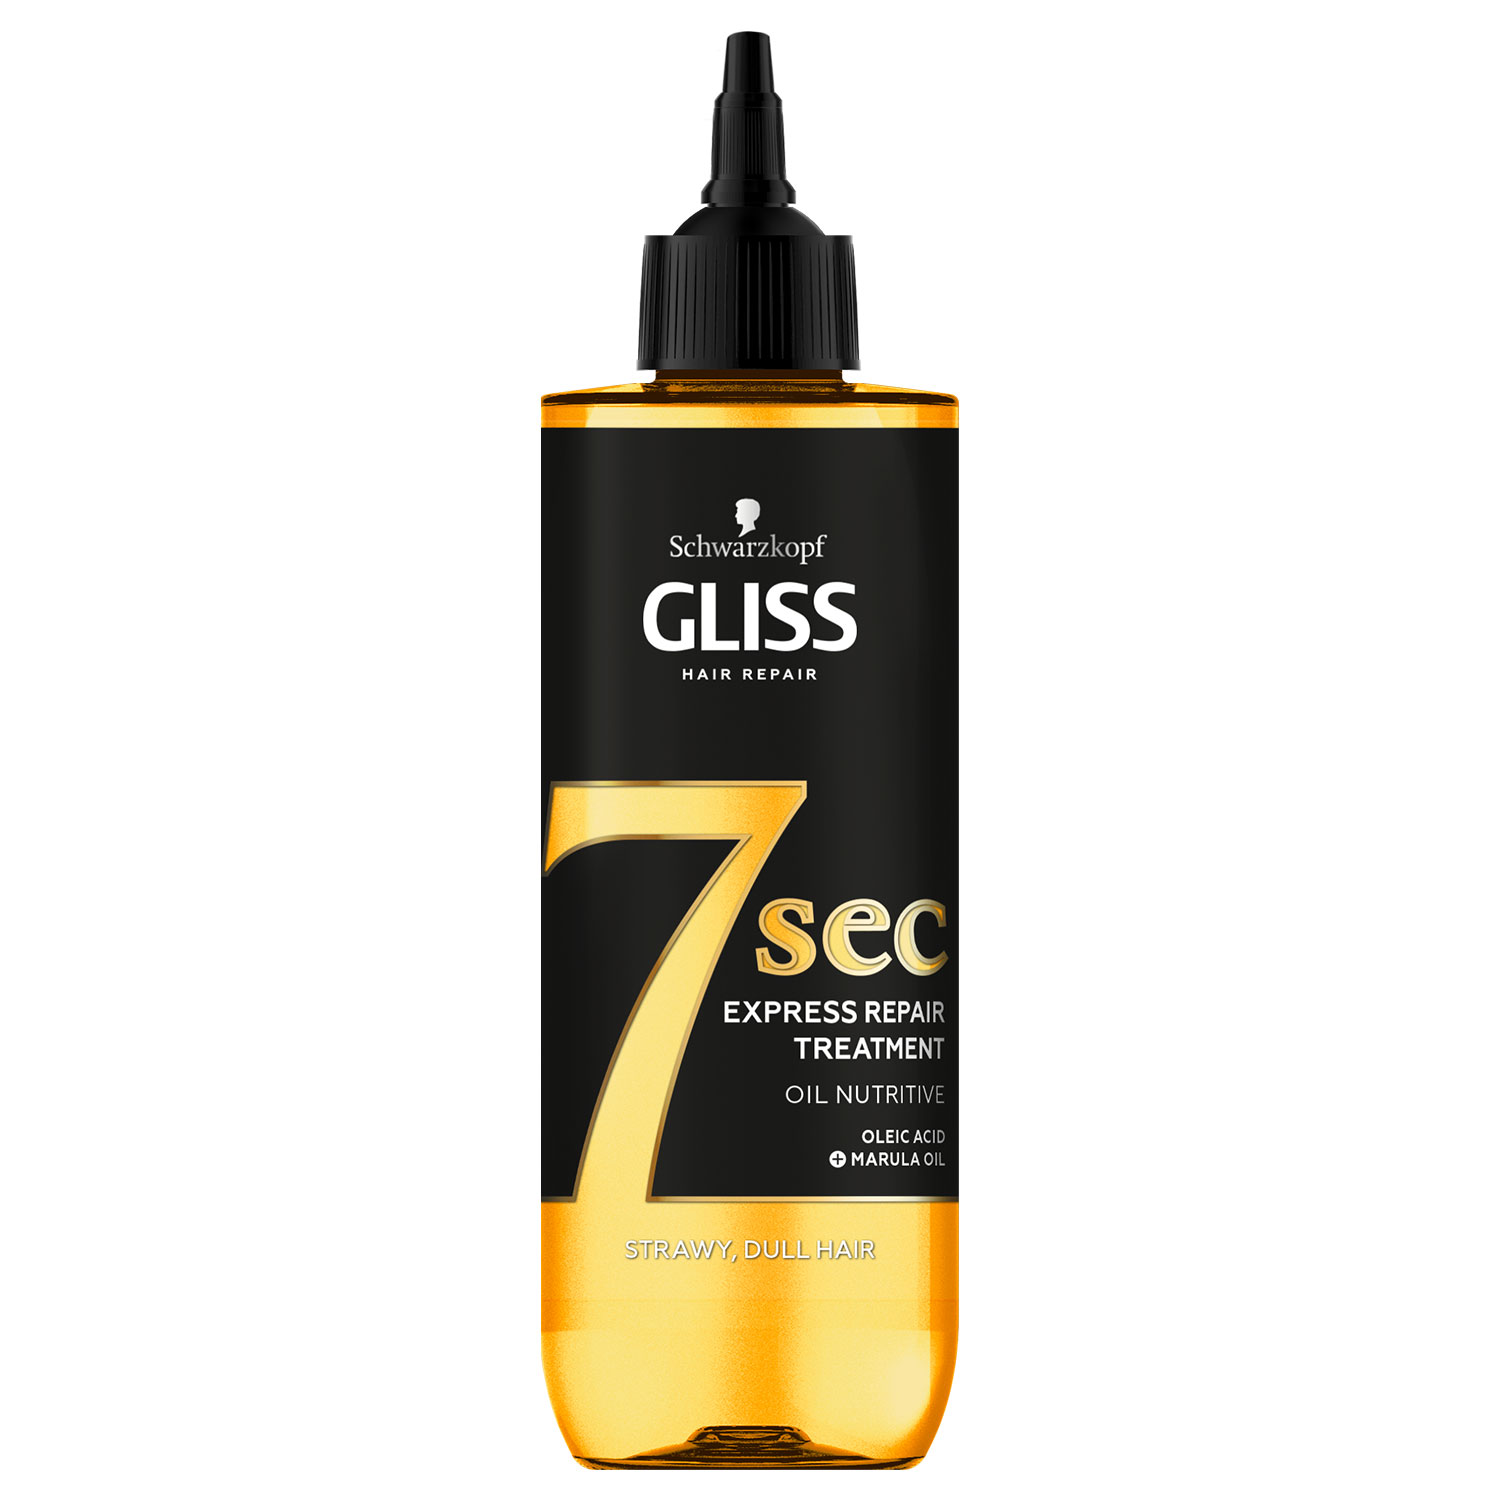 Express-Mask GLISS Oil Nutritive 7 seconds 200 ml